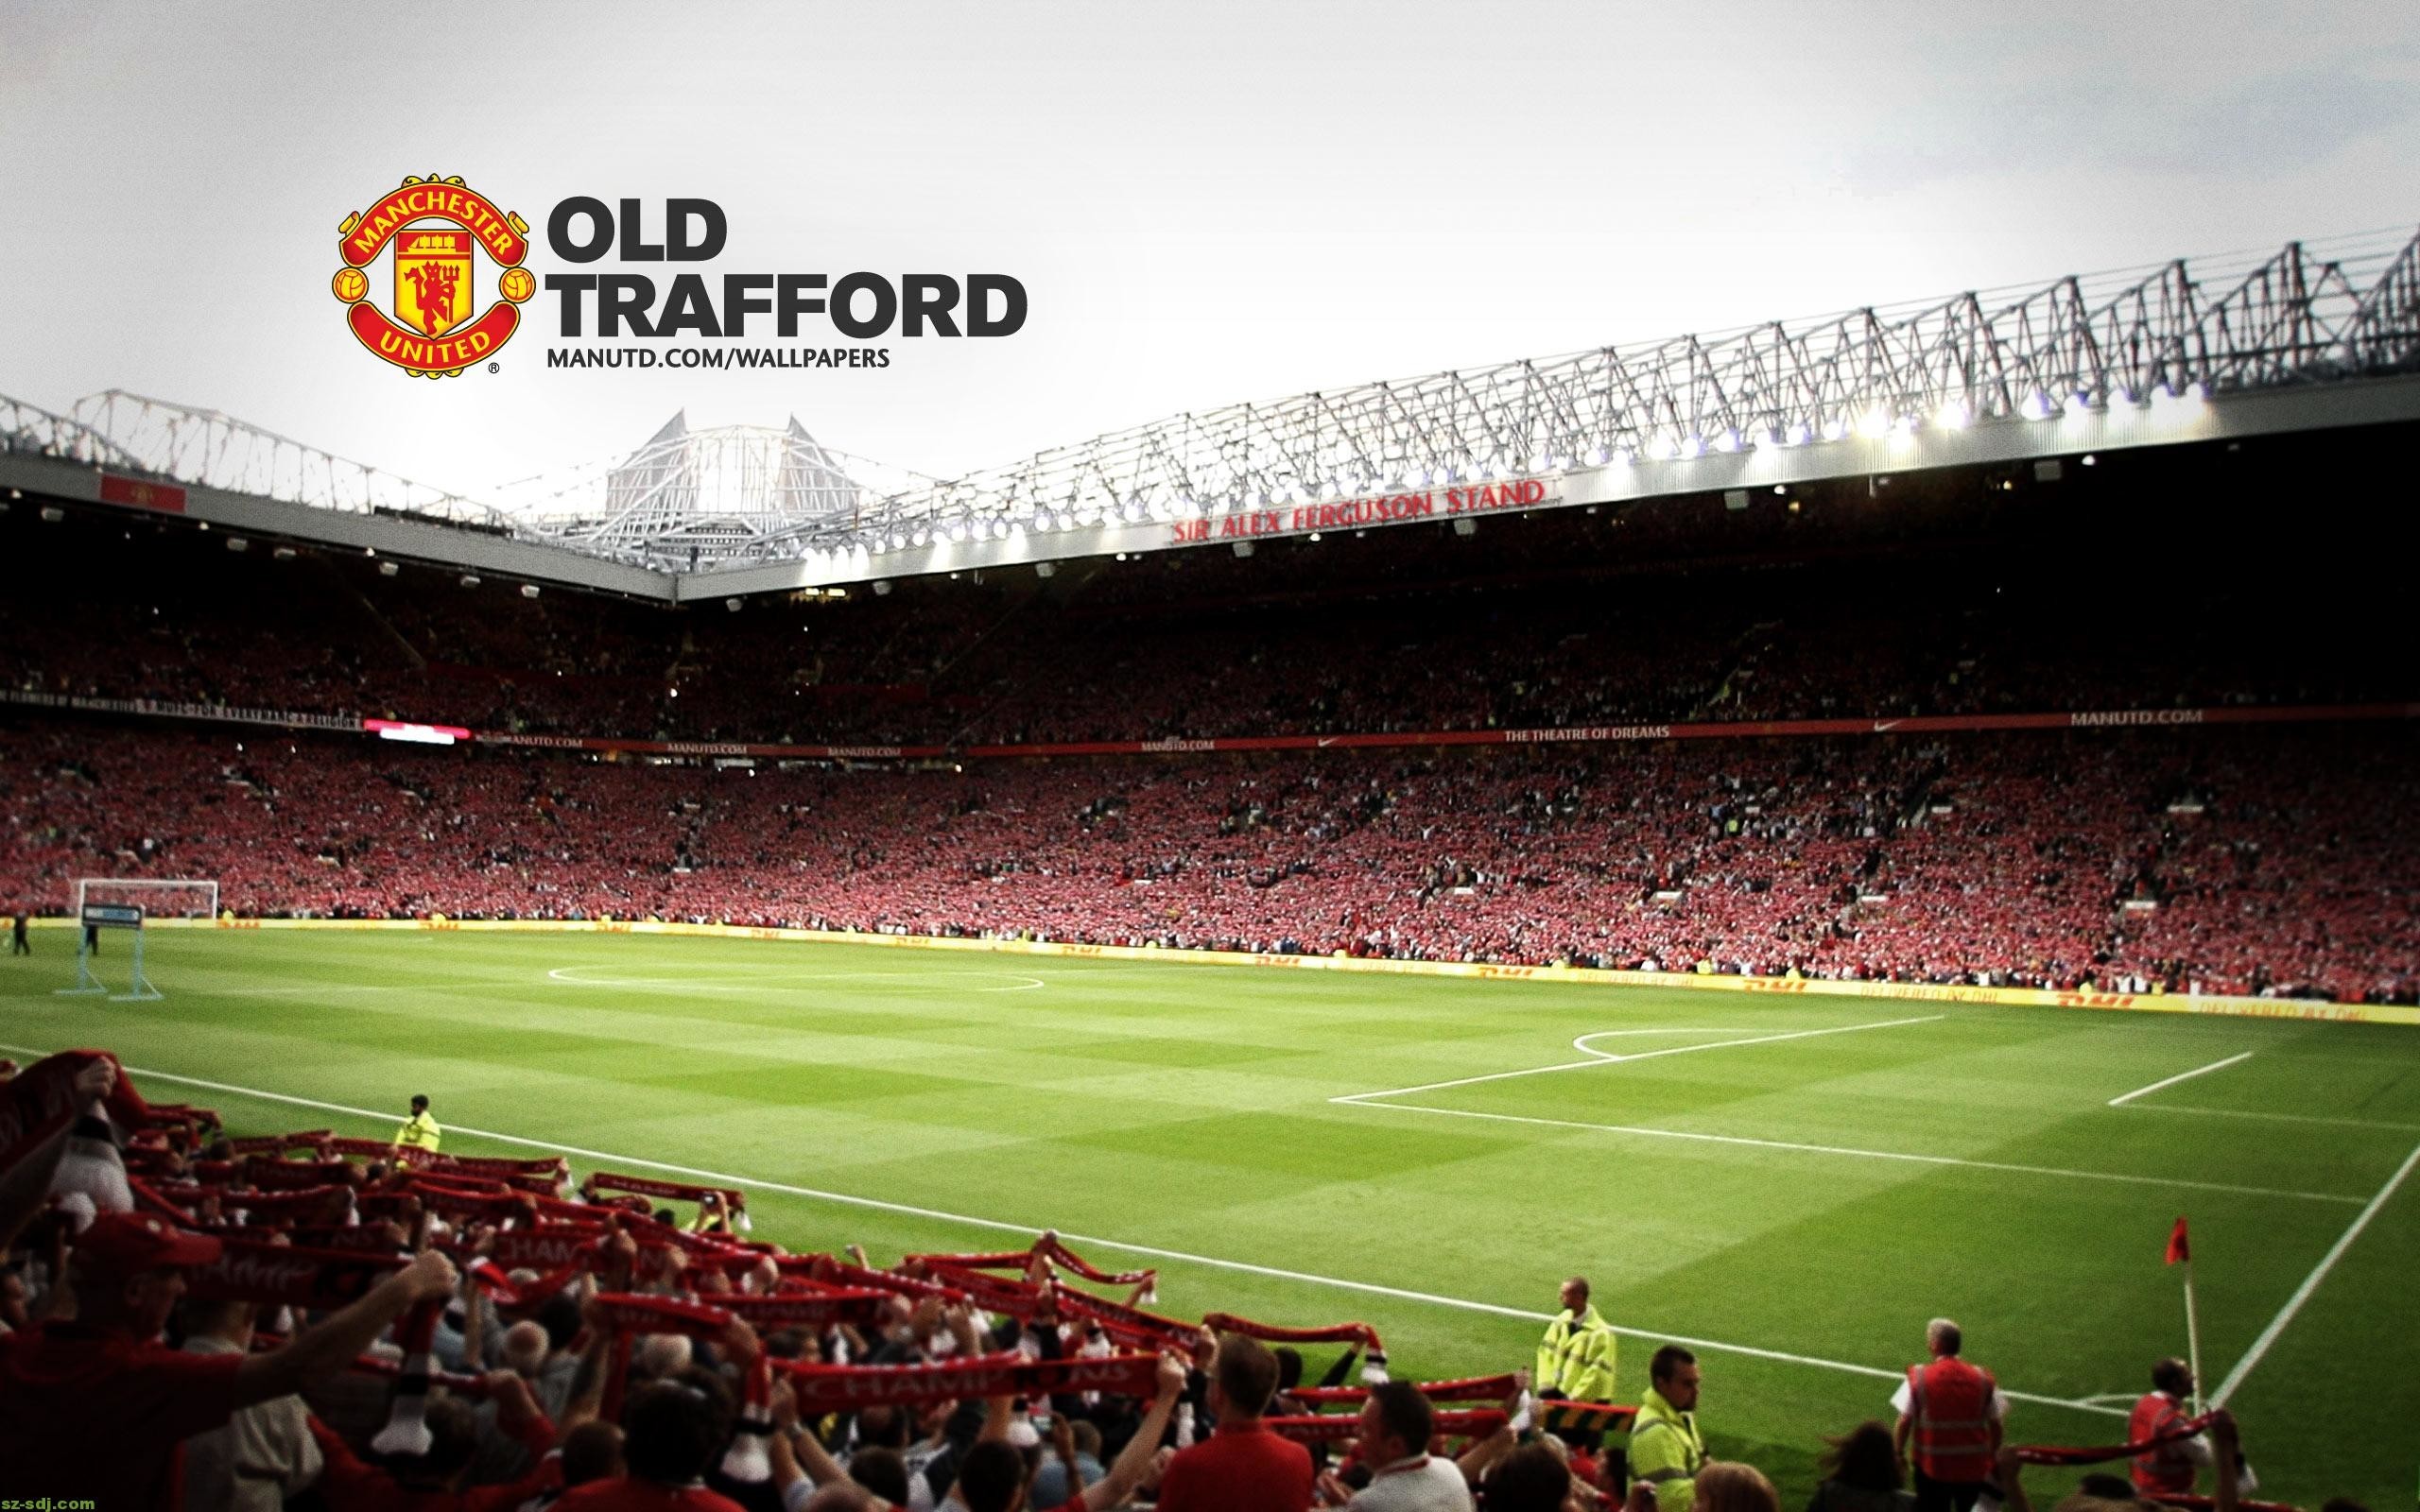 2560x1600  Manchester United Wallpapers x Manchester United | HD Wallpapers  | Pinterest | Hd wallpaper and Wallpaper